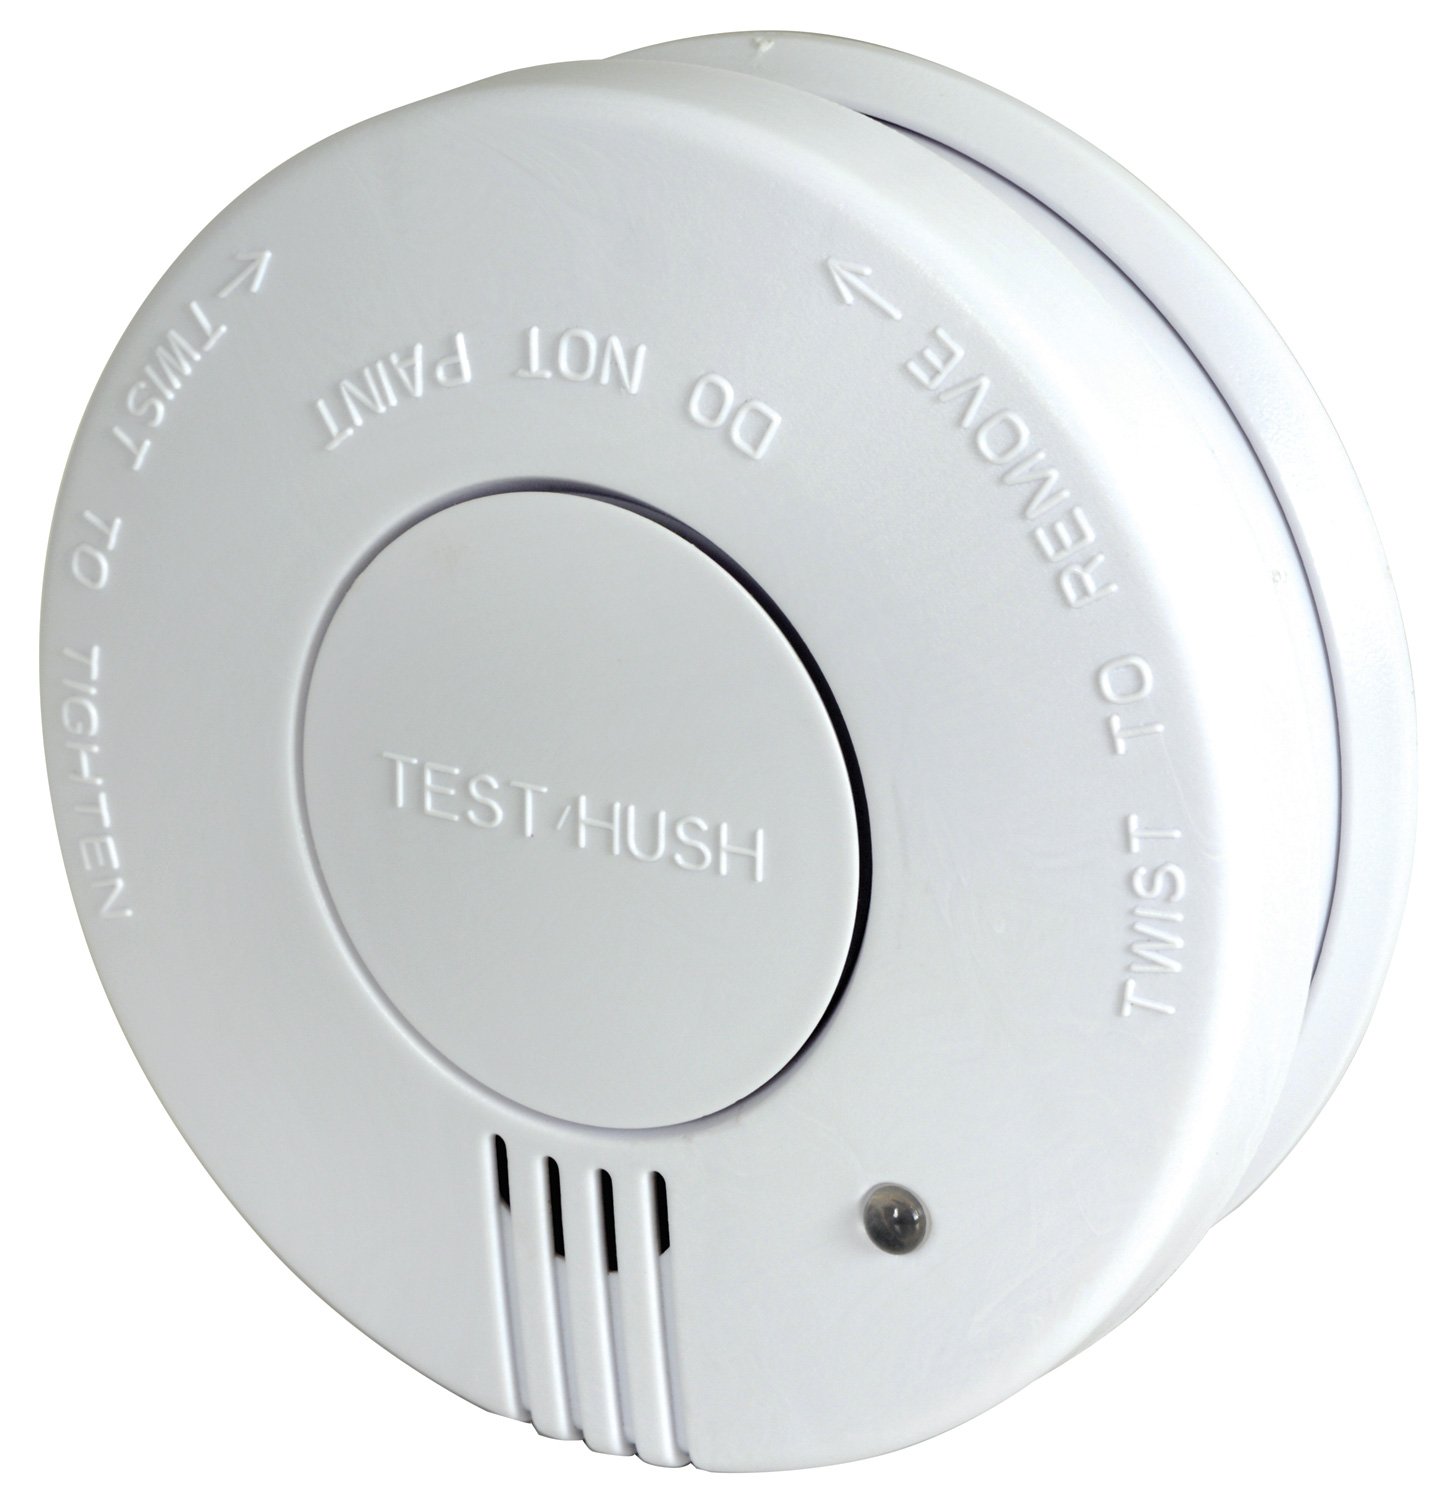 Photoelectric Smoke Detector with Hush Feature Smoke detector w/hush button